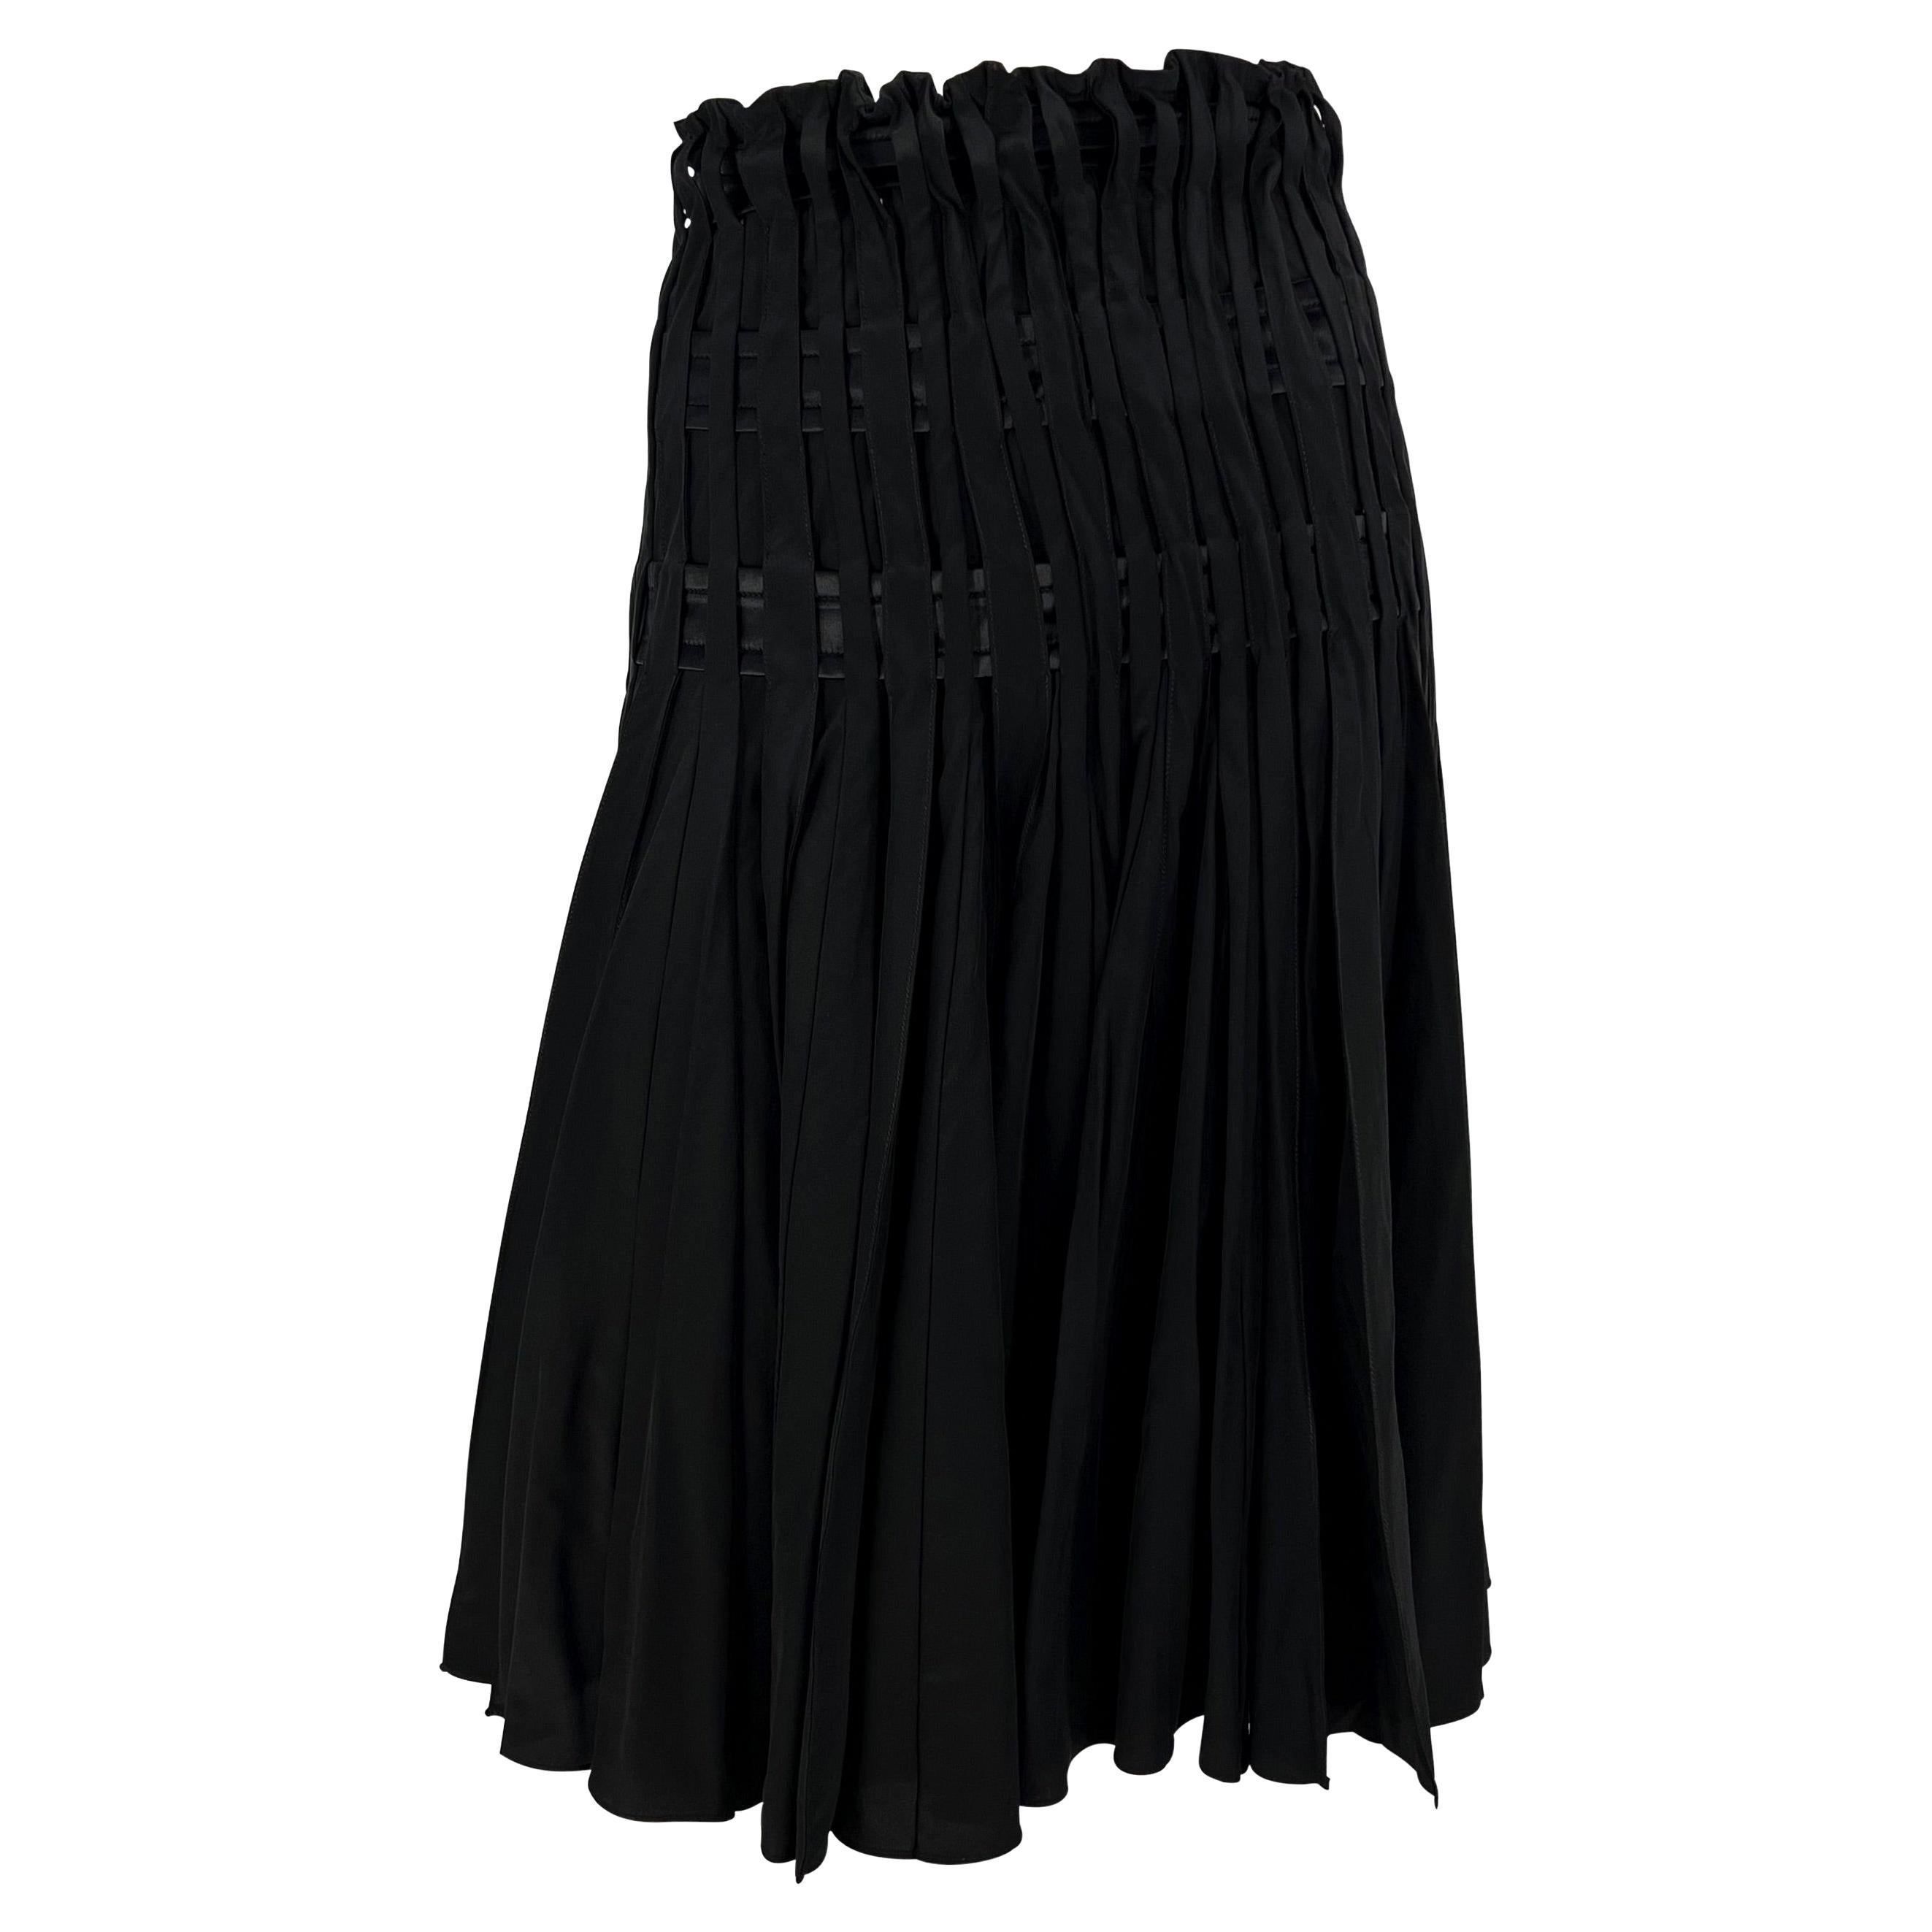 F/W 2001 Yves Saint Laurent by Tom Ford Pleated Black Satin Flare Skirt For Sale